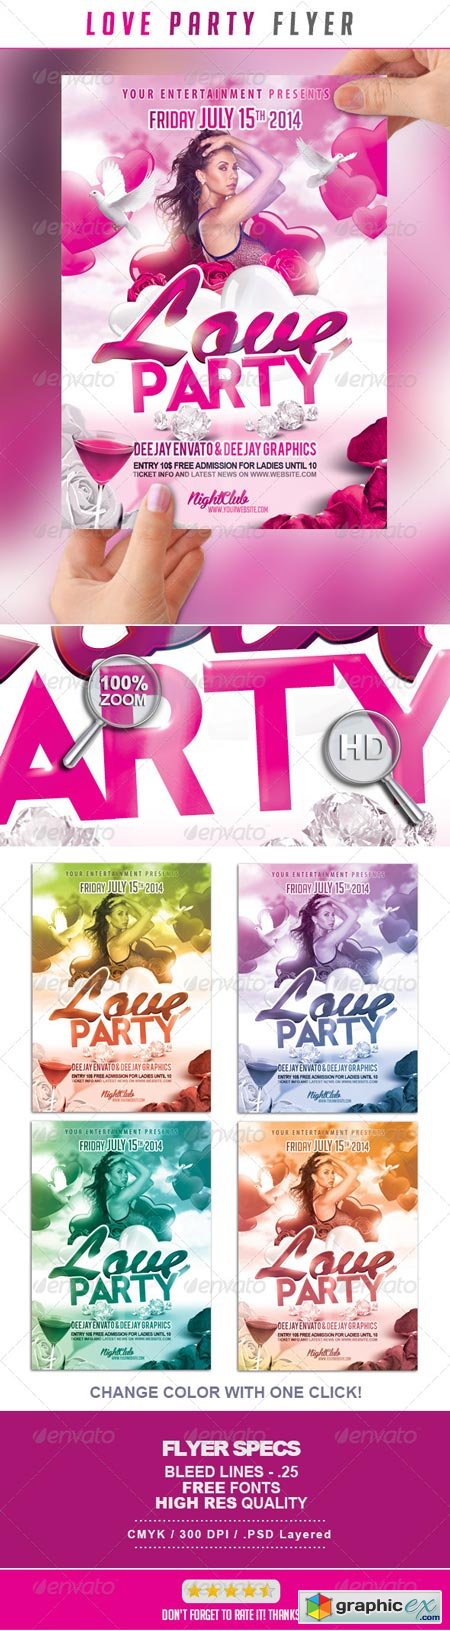 Love Party Flyer 6680385